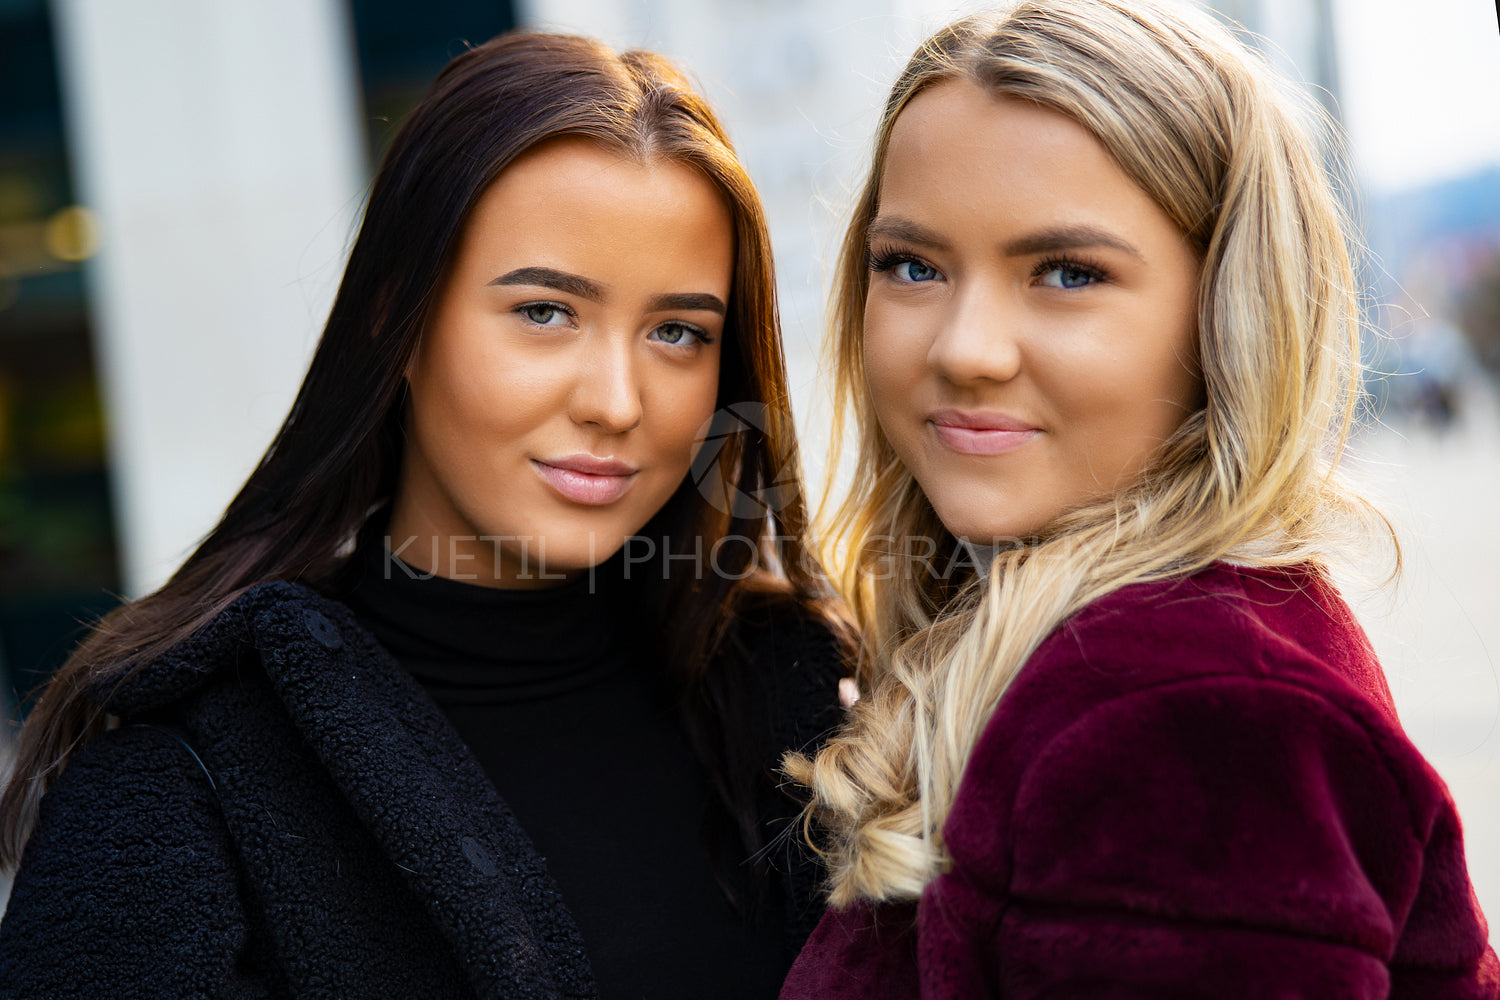 Close-up Portrait Of Smiling Beautiful Young Women Friends In City